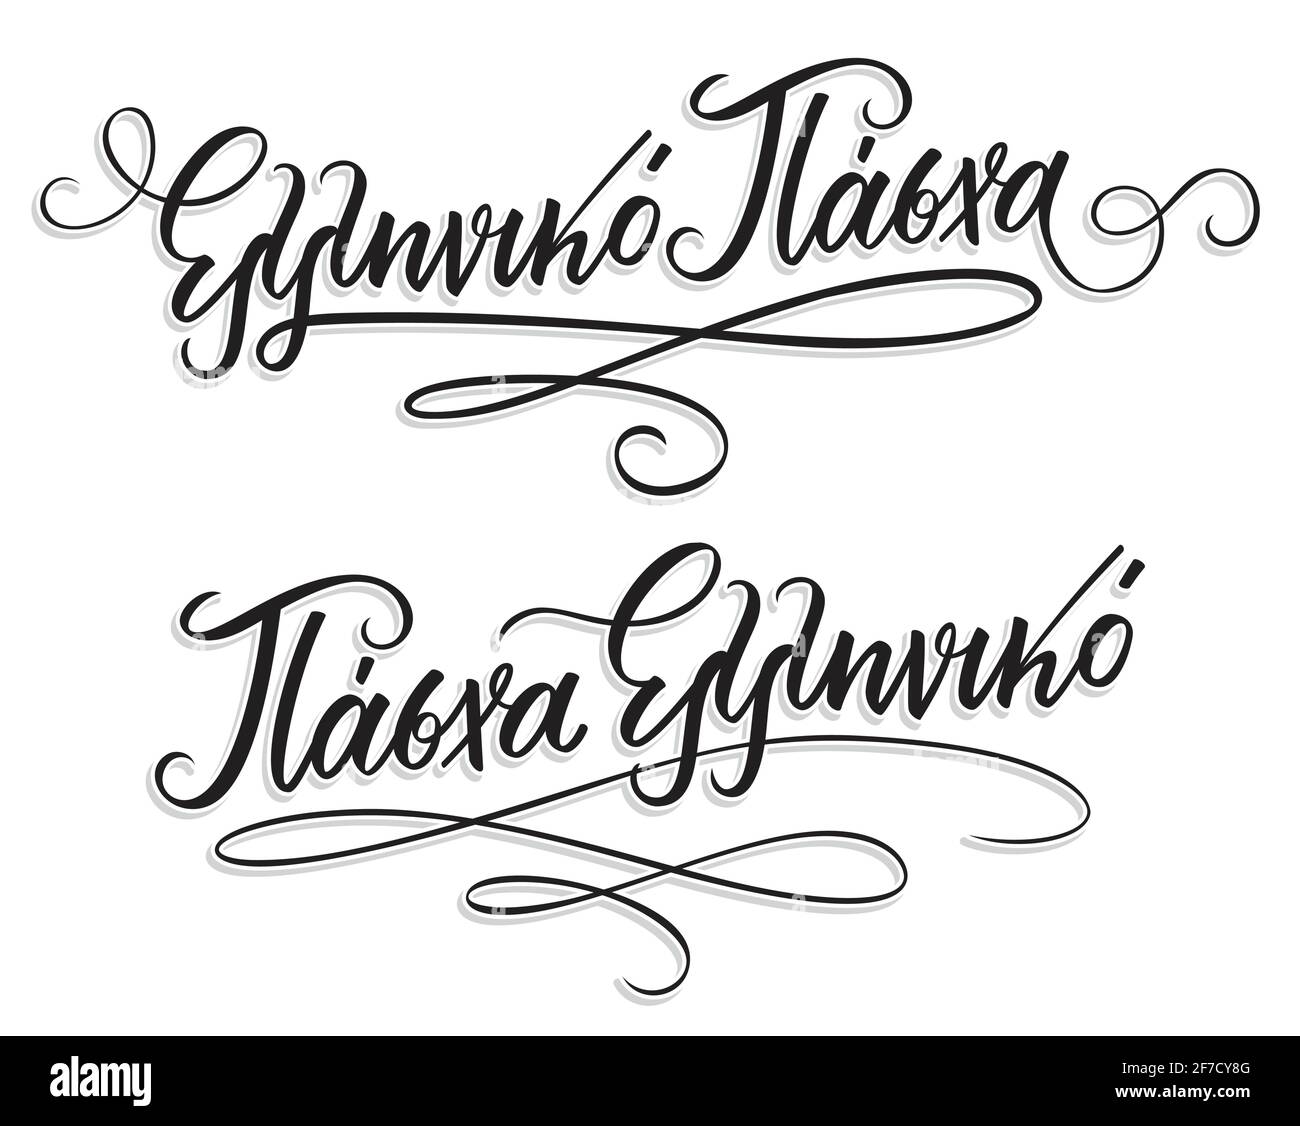 Elliniko Pasha in greek language means Greek Easter. Hand Lettering Calligraphy with Brush Pen. Vector Print Illustration.  Stock Vector